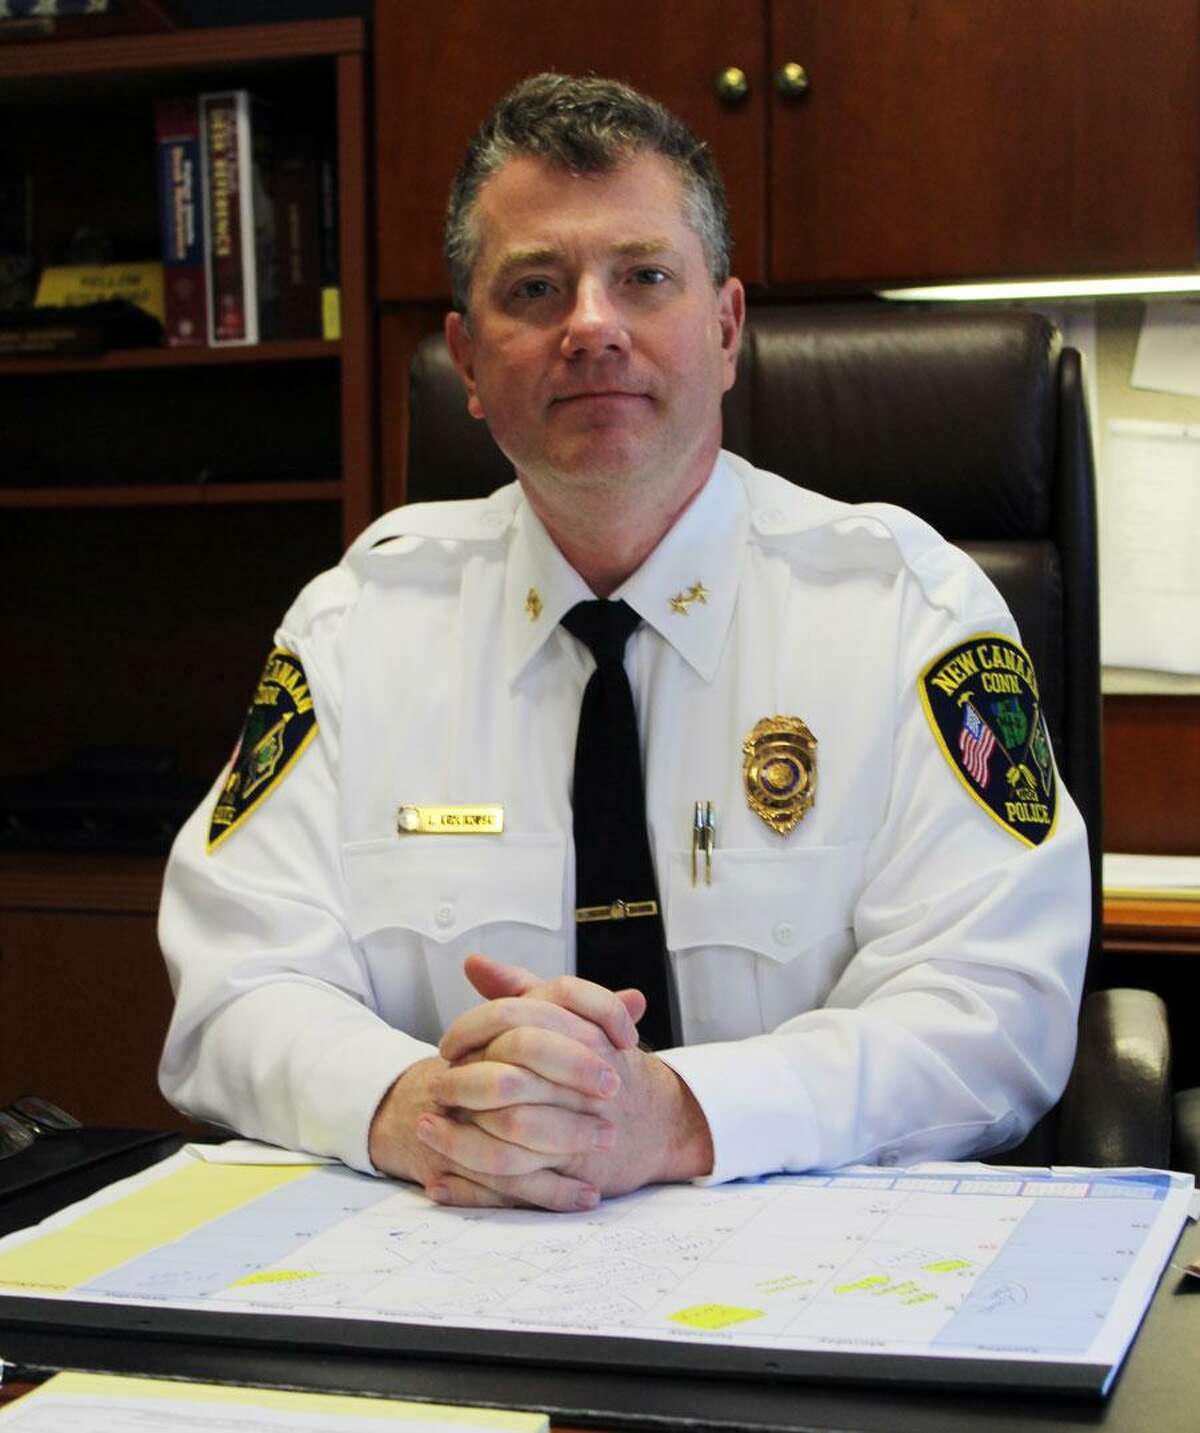 New Canaan Chief of Police Leon M. Krolikowski writes this guest column about Memorial Day, along with solicitations that can occur.